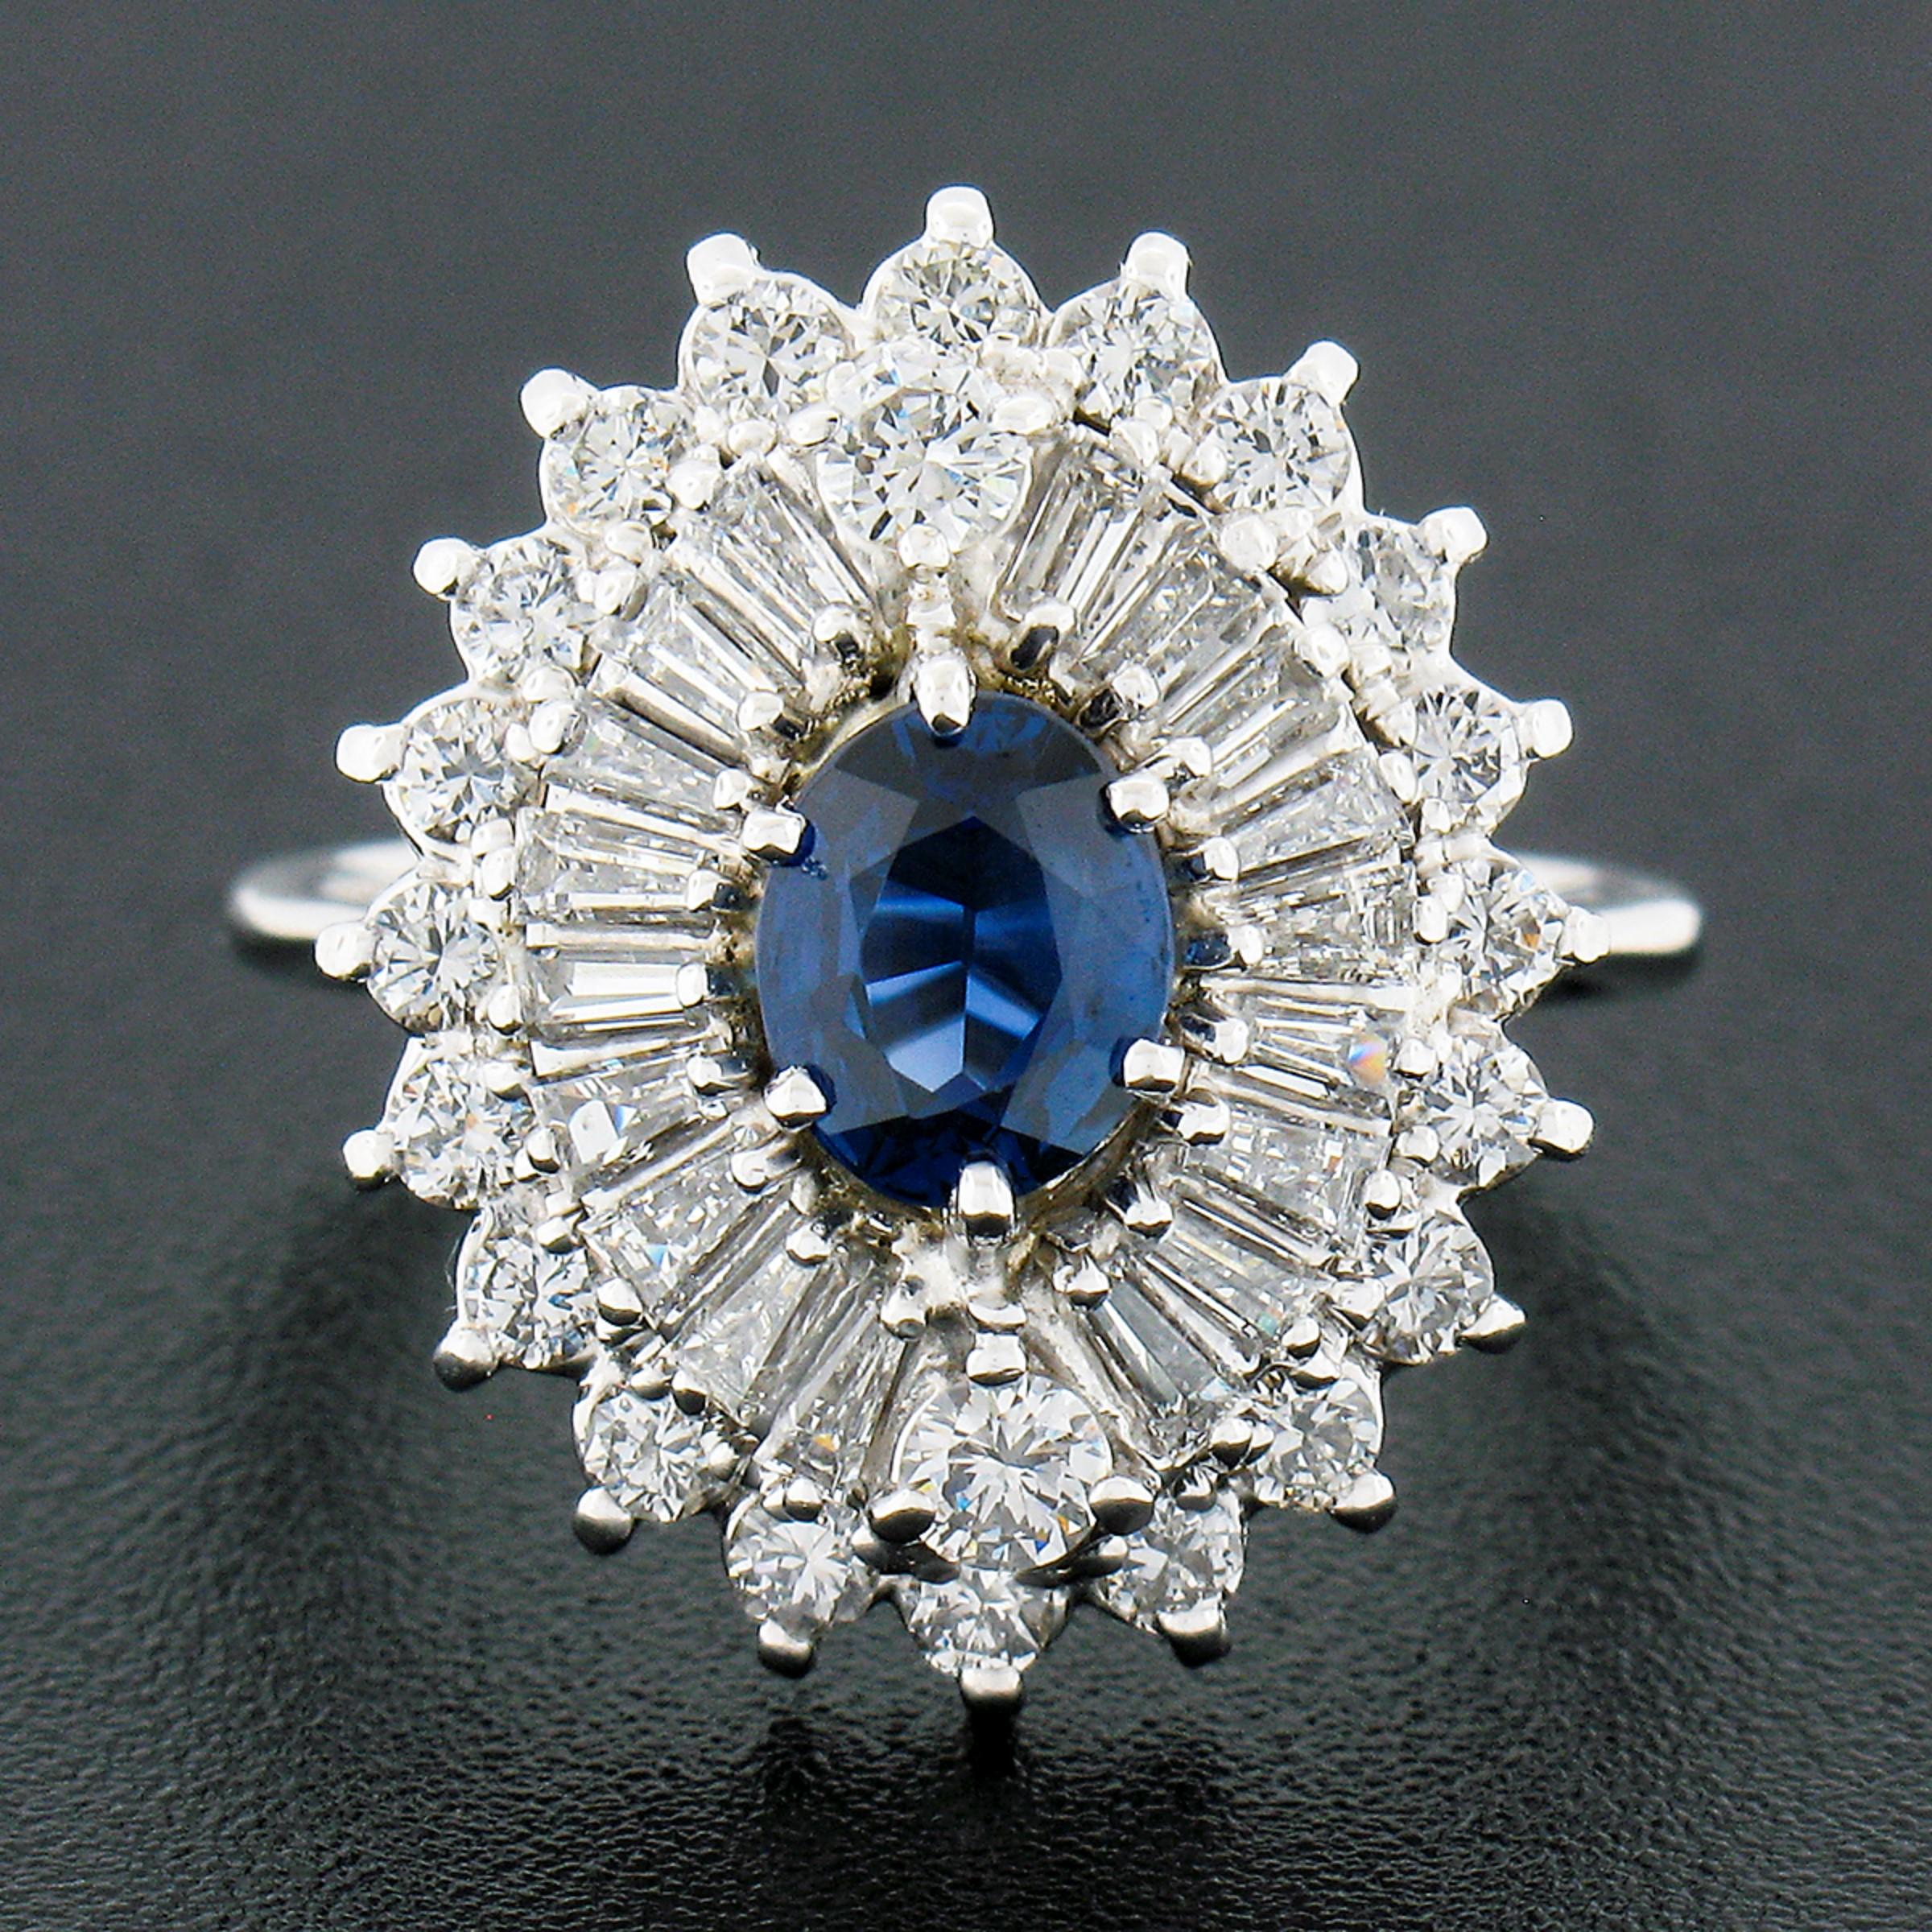 This absolutely stunning, ballerina style cocktail ring is crafted in solid 18k white gold. It features a gorgeous, oval cut, natural sapphire stone neatly prong set at its center displaying a beautiful blue color with amazing shine due to its